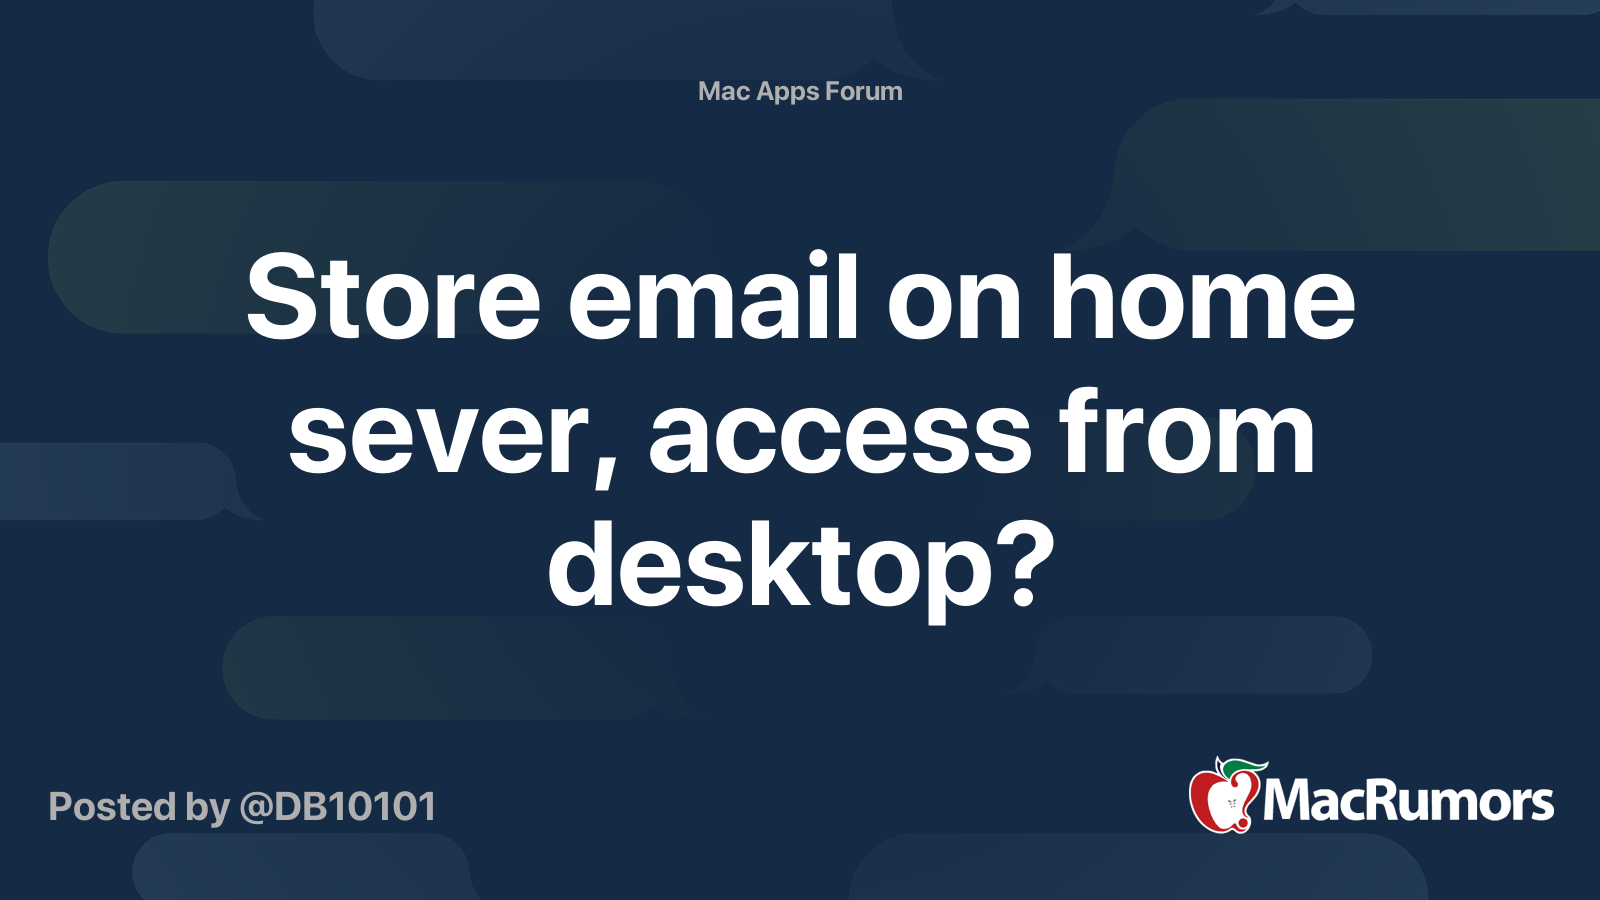 Store email on home sever, access from desktop?